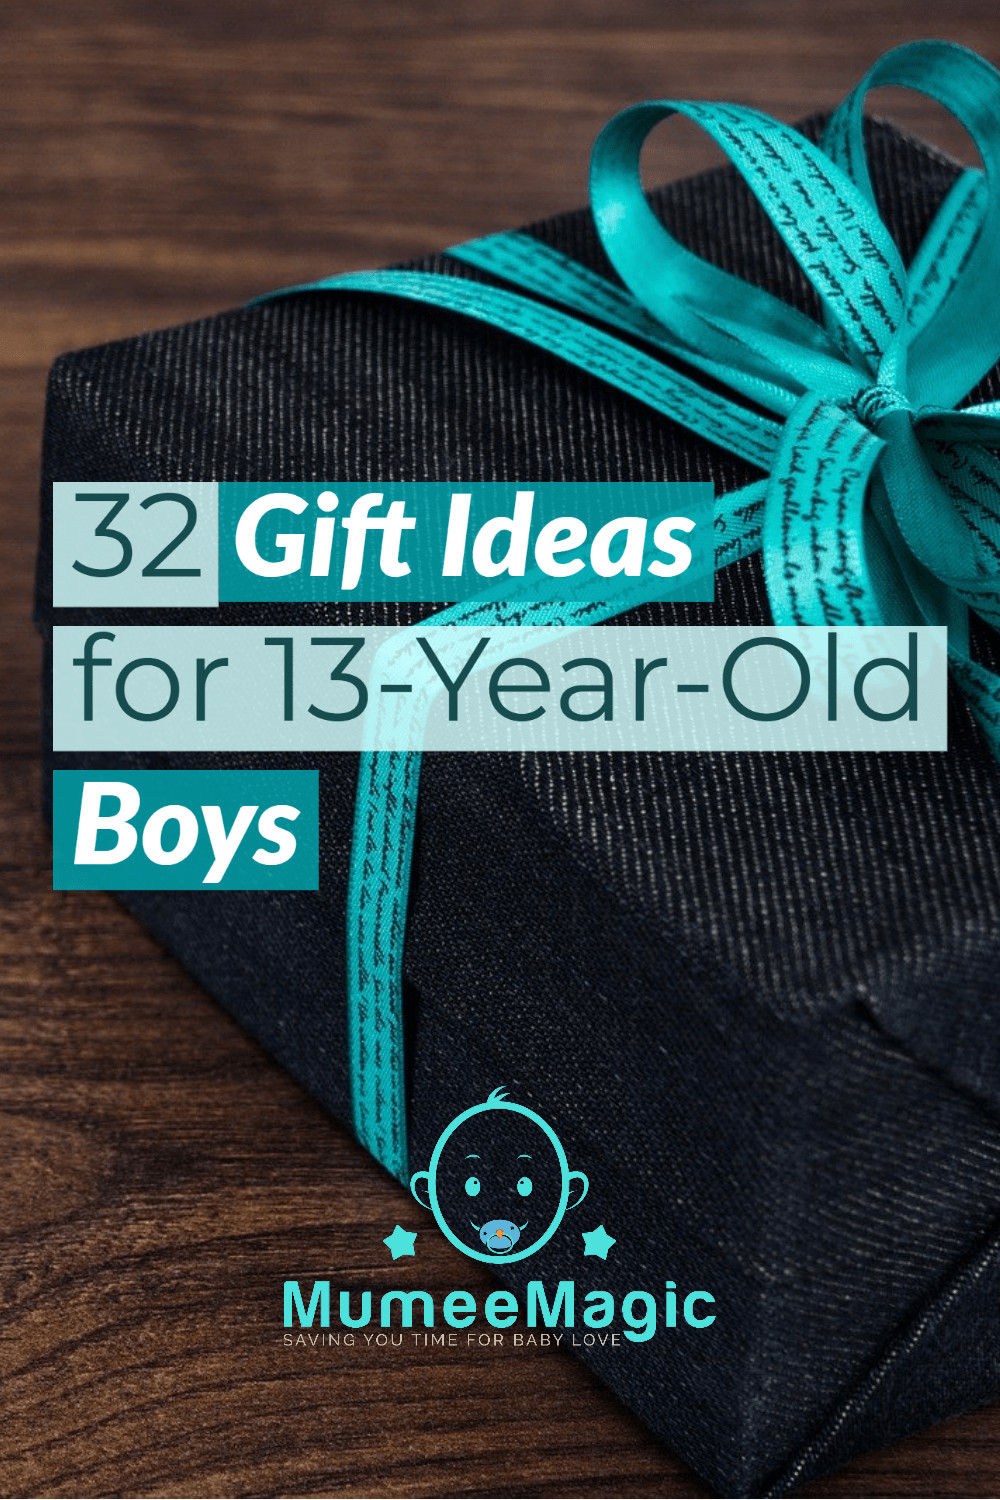 Gift Ideas For 13 Year Old Boys
 32 Best Gift Ideas and Reviews For 13 Year Old Boys 2020